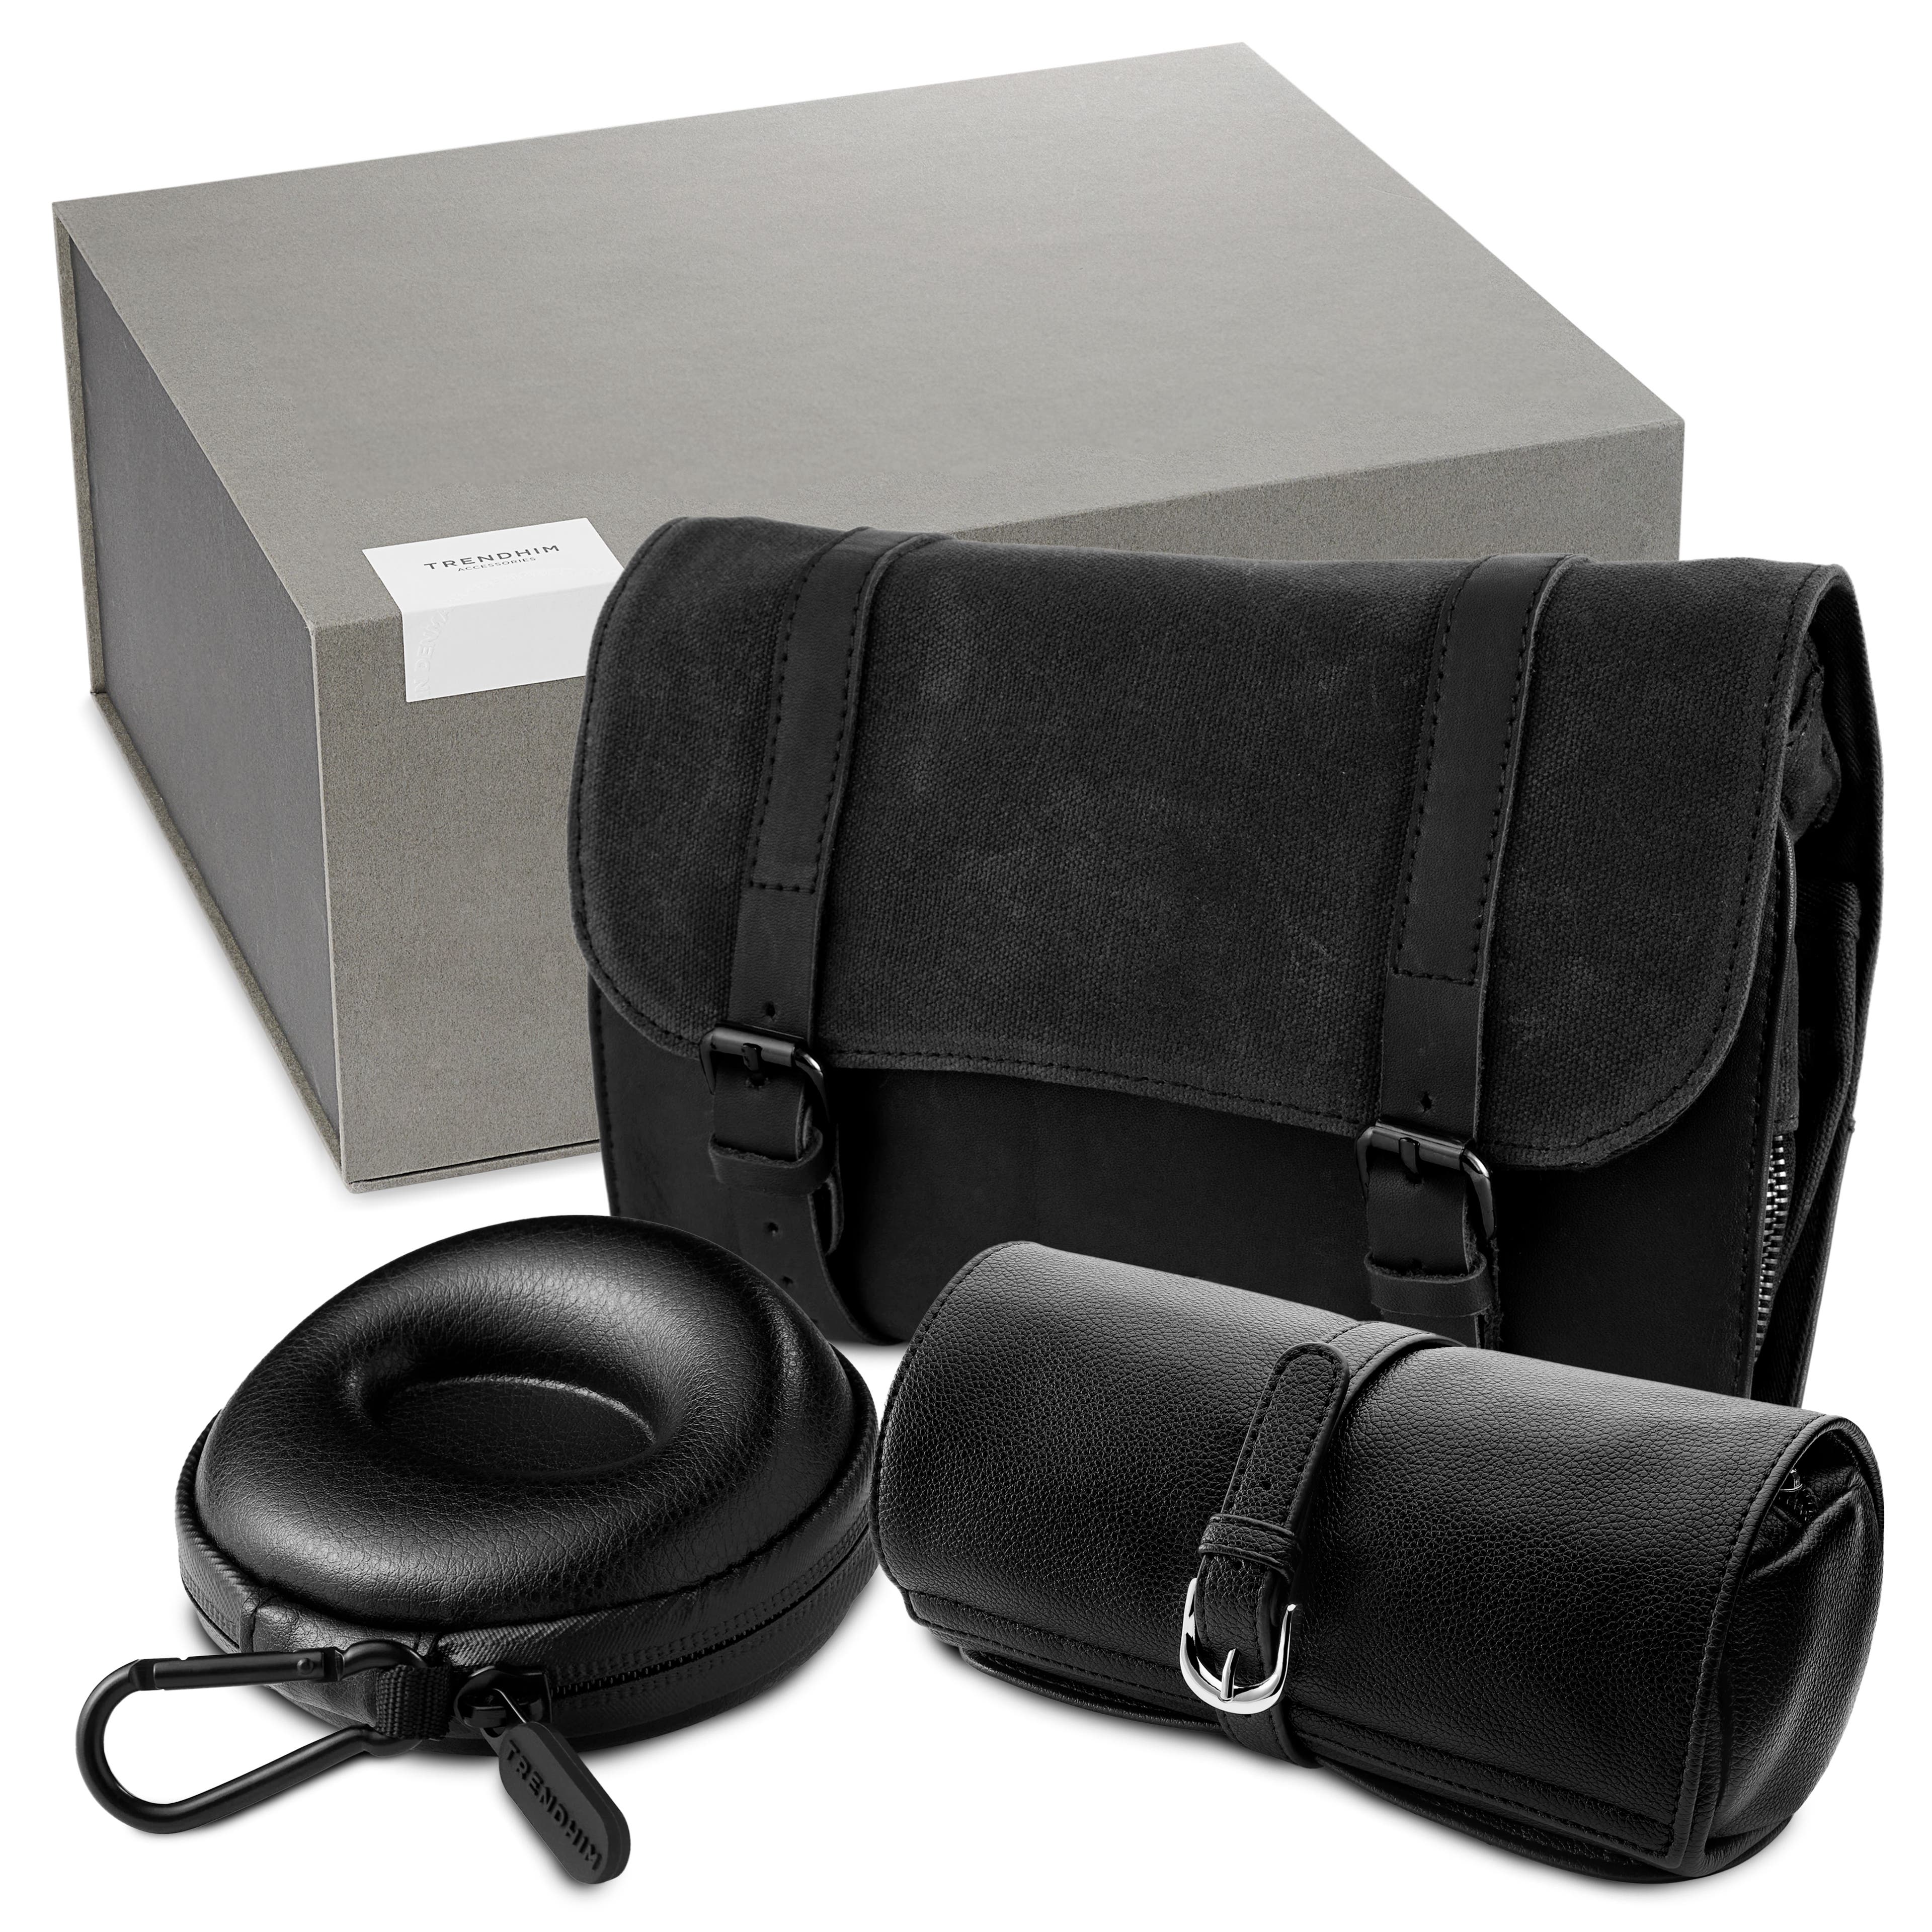 Deluxe Travel Organiser Gift Box | Black Leather & Canvas